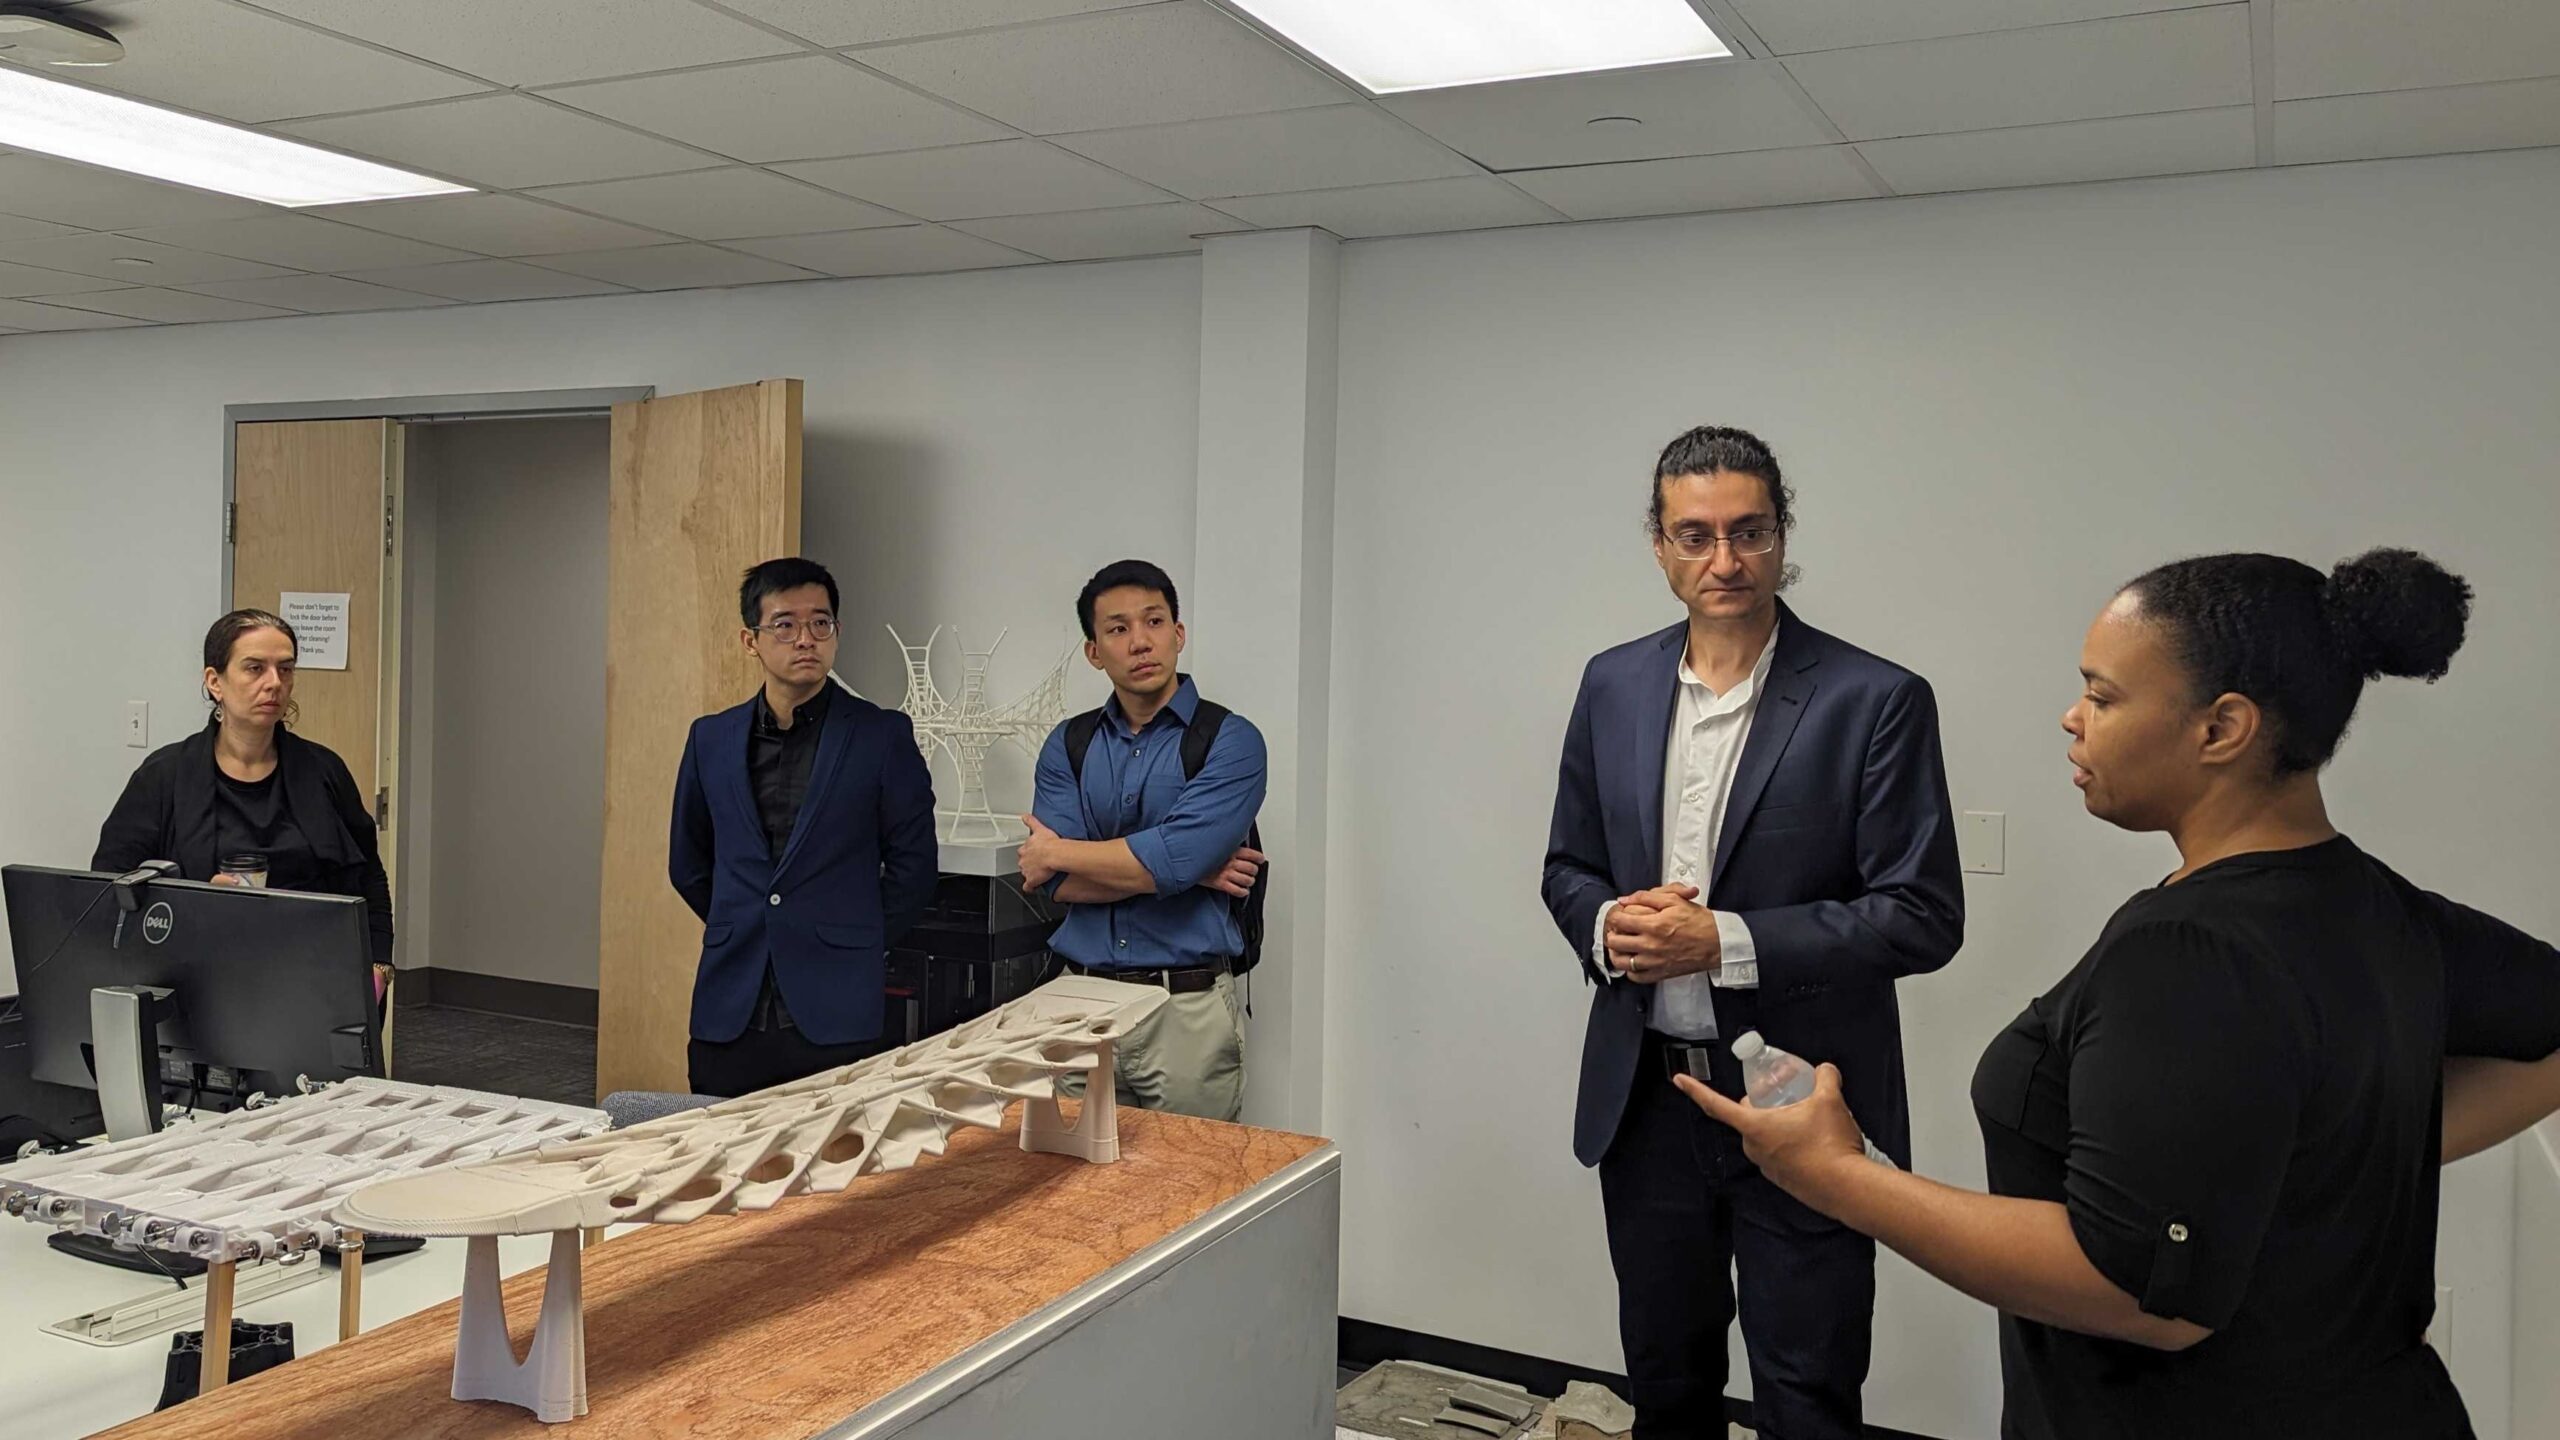 ARPA-E juries visit Polyhedral Structures Laboratory